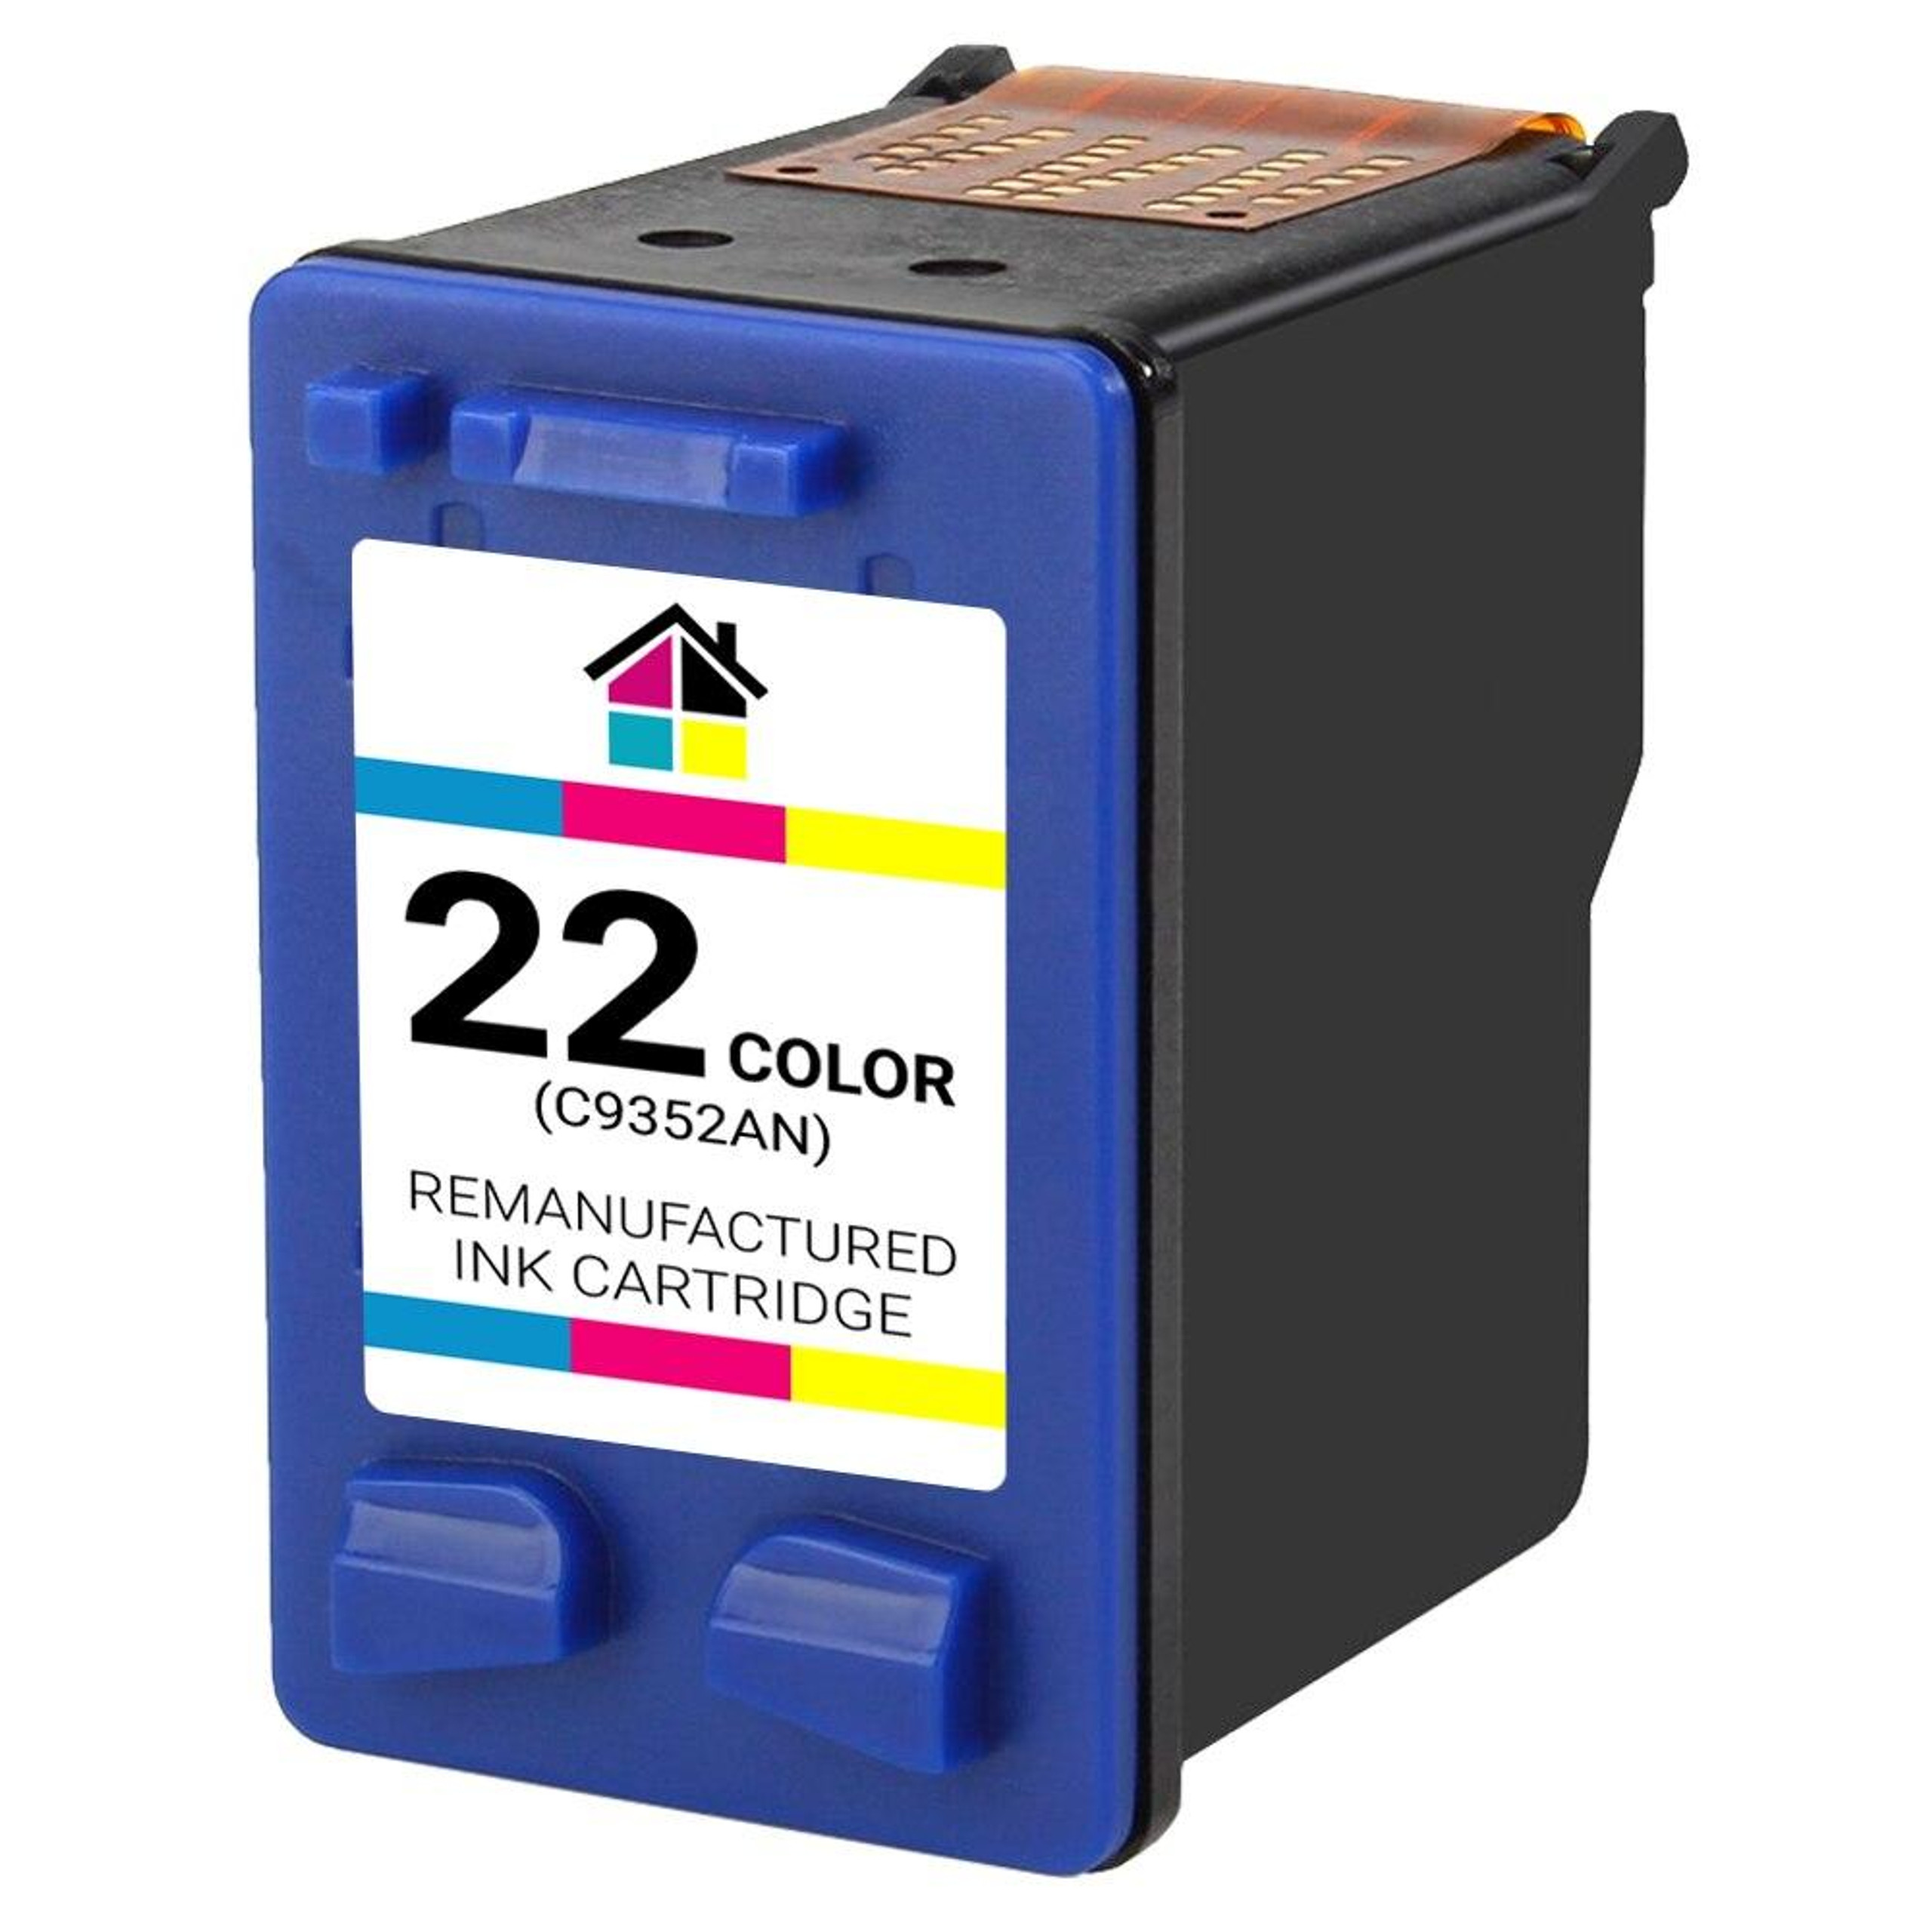 Remanufactured Ink Cartridge For Hp 21 C9351an Black Houseofinks 5820